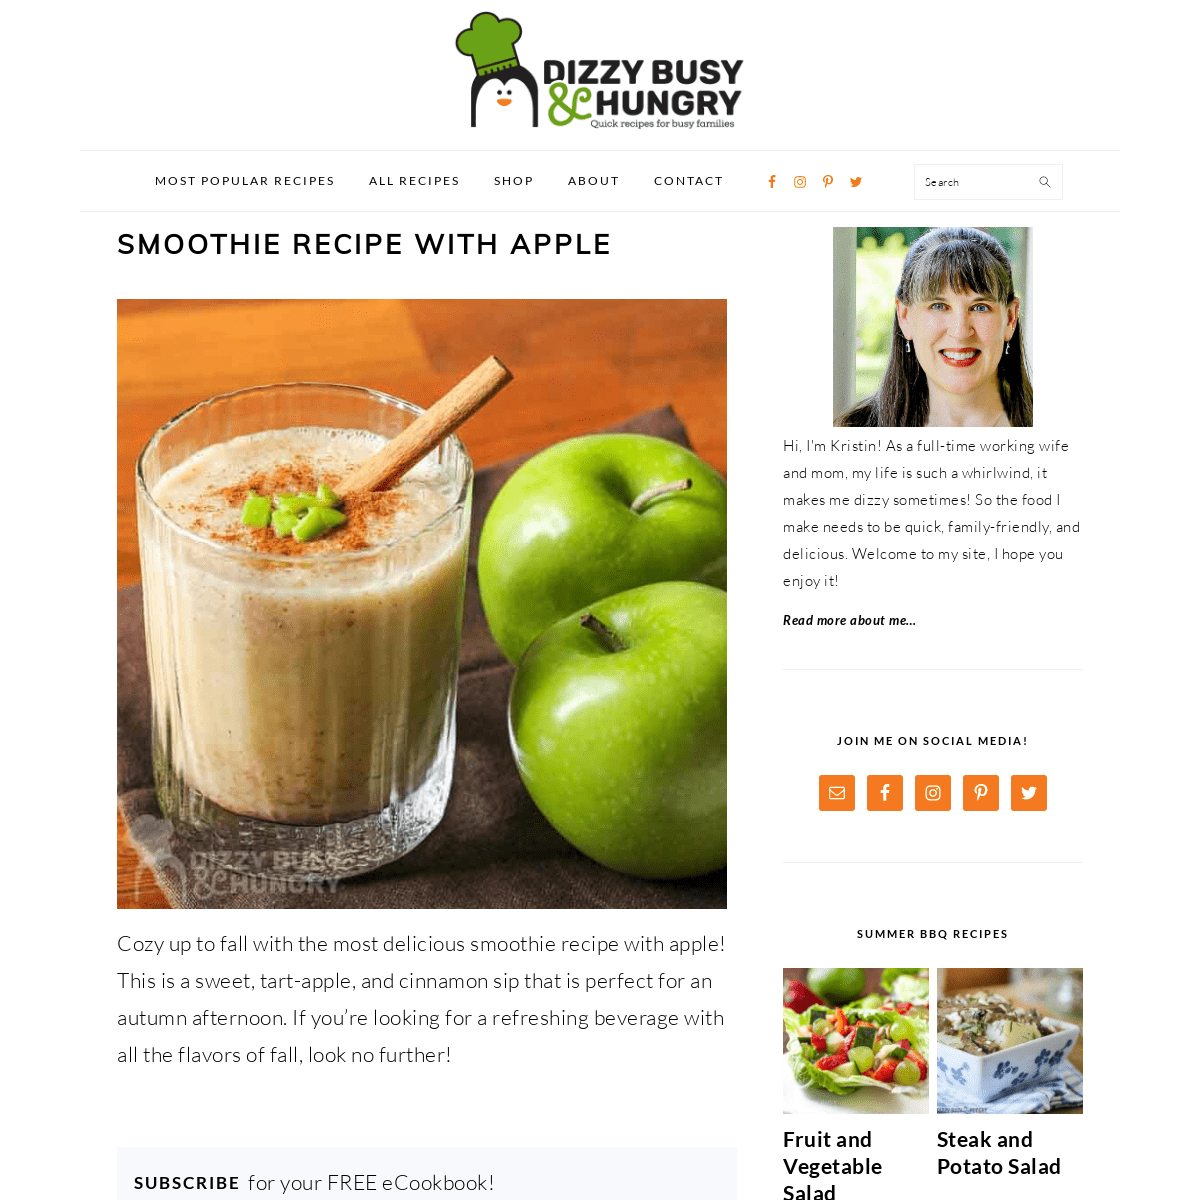 Quick Recipes for Busy Families - Dizzy Busy and Hungry